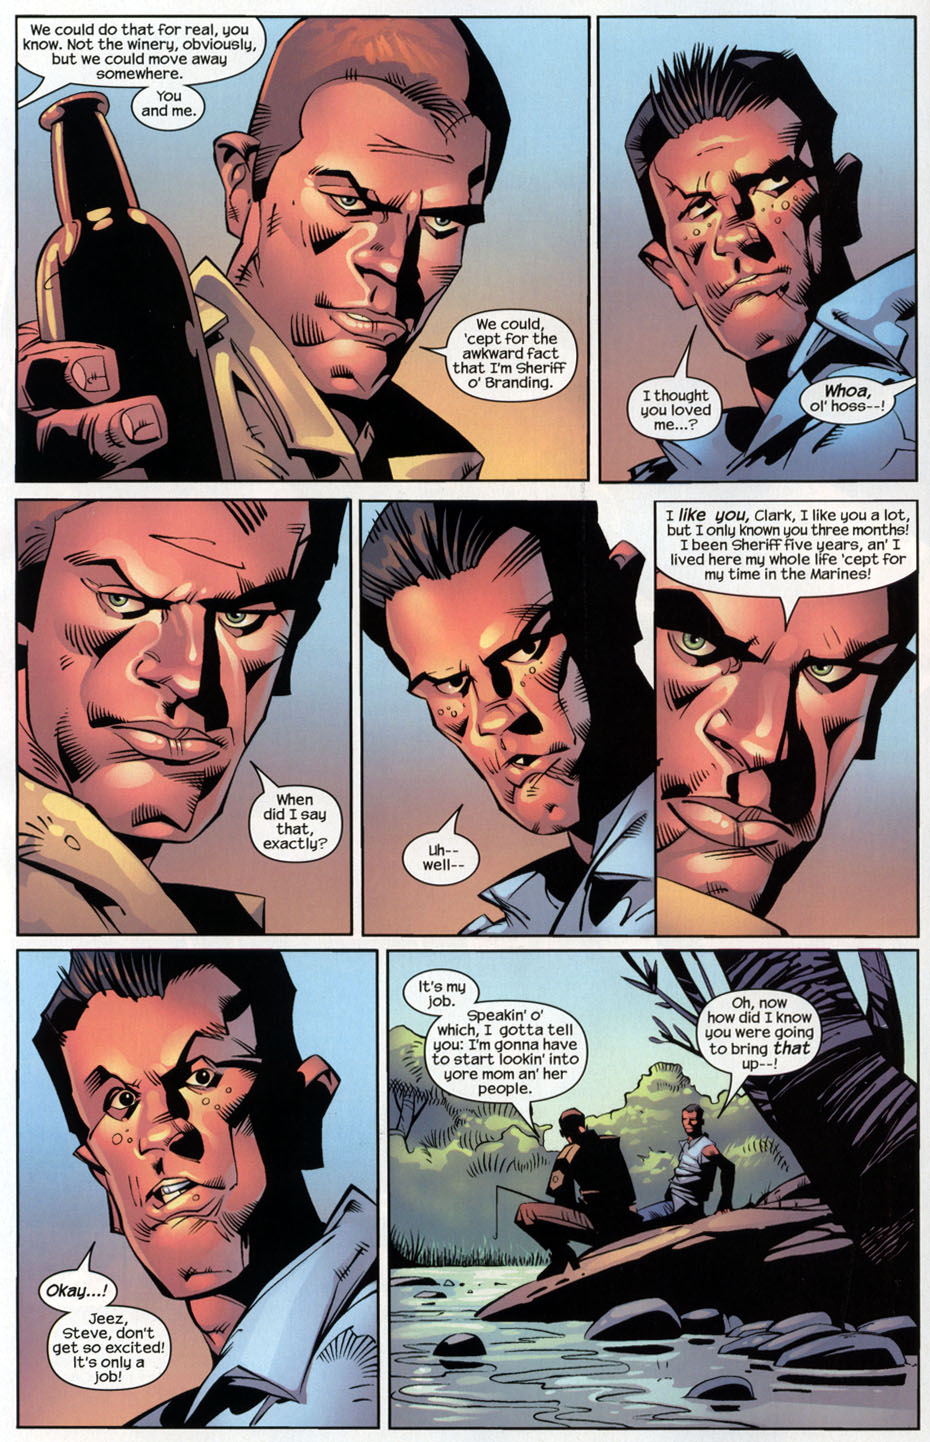 The Punisher (2001) issue 29 - Streets of Laredo #02 - Page 11